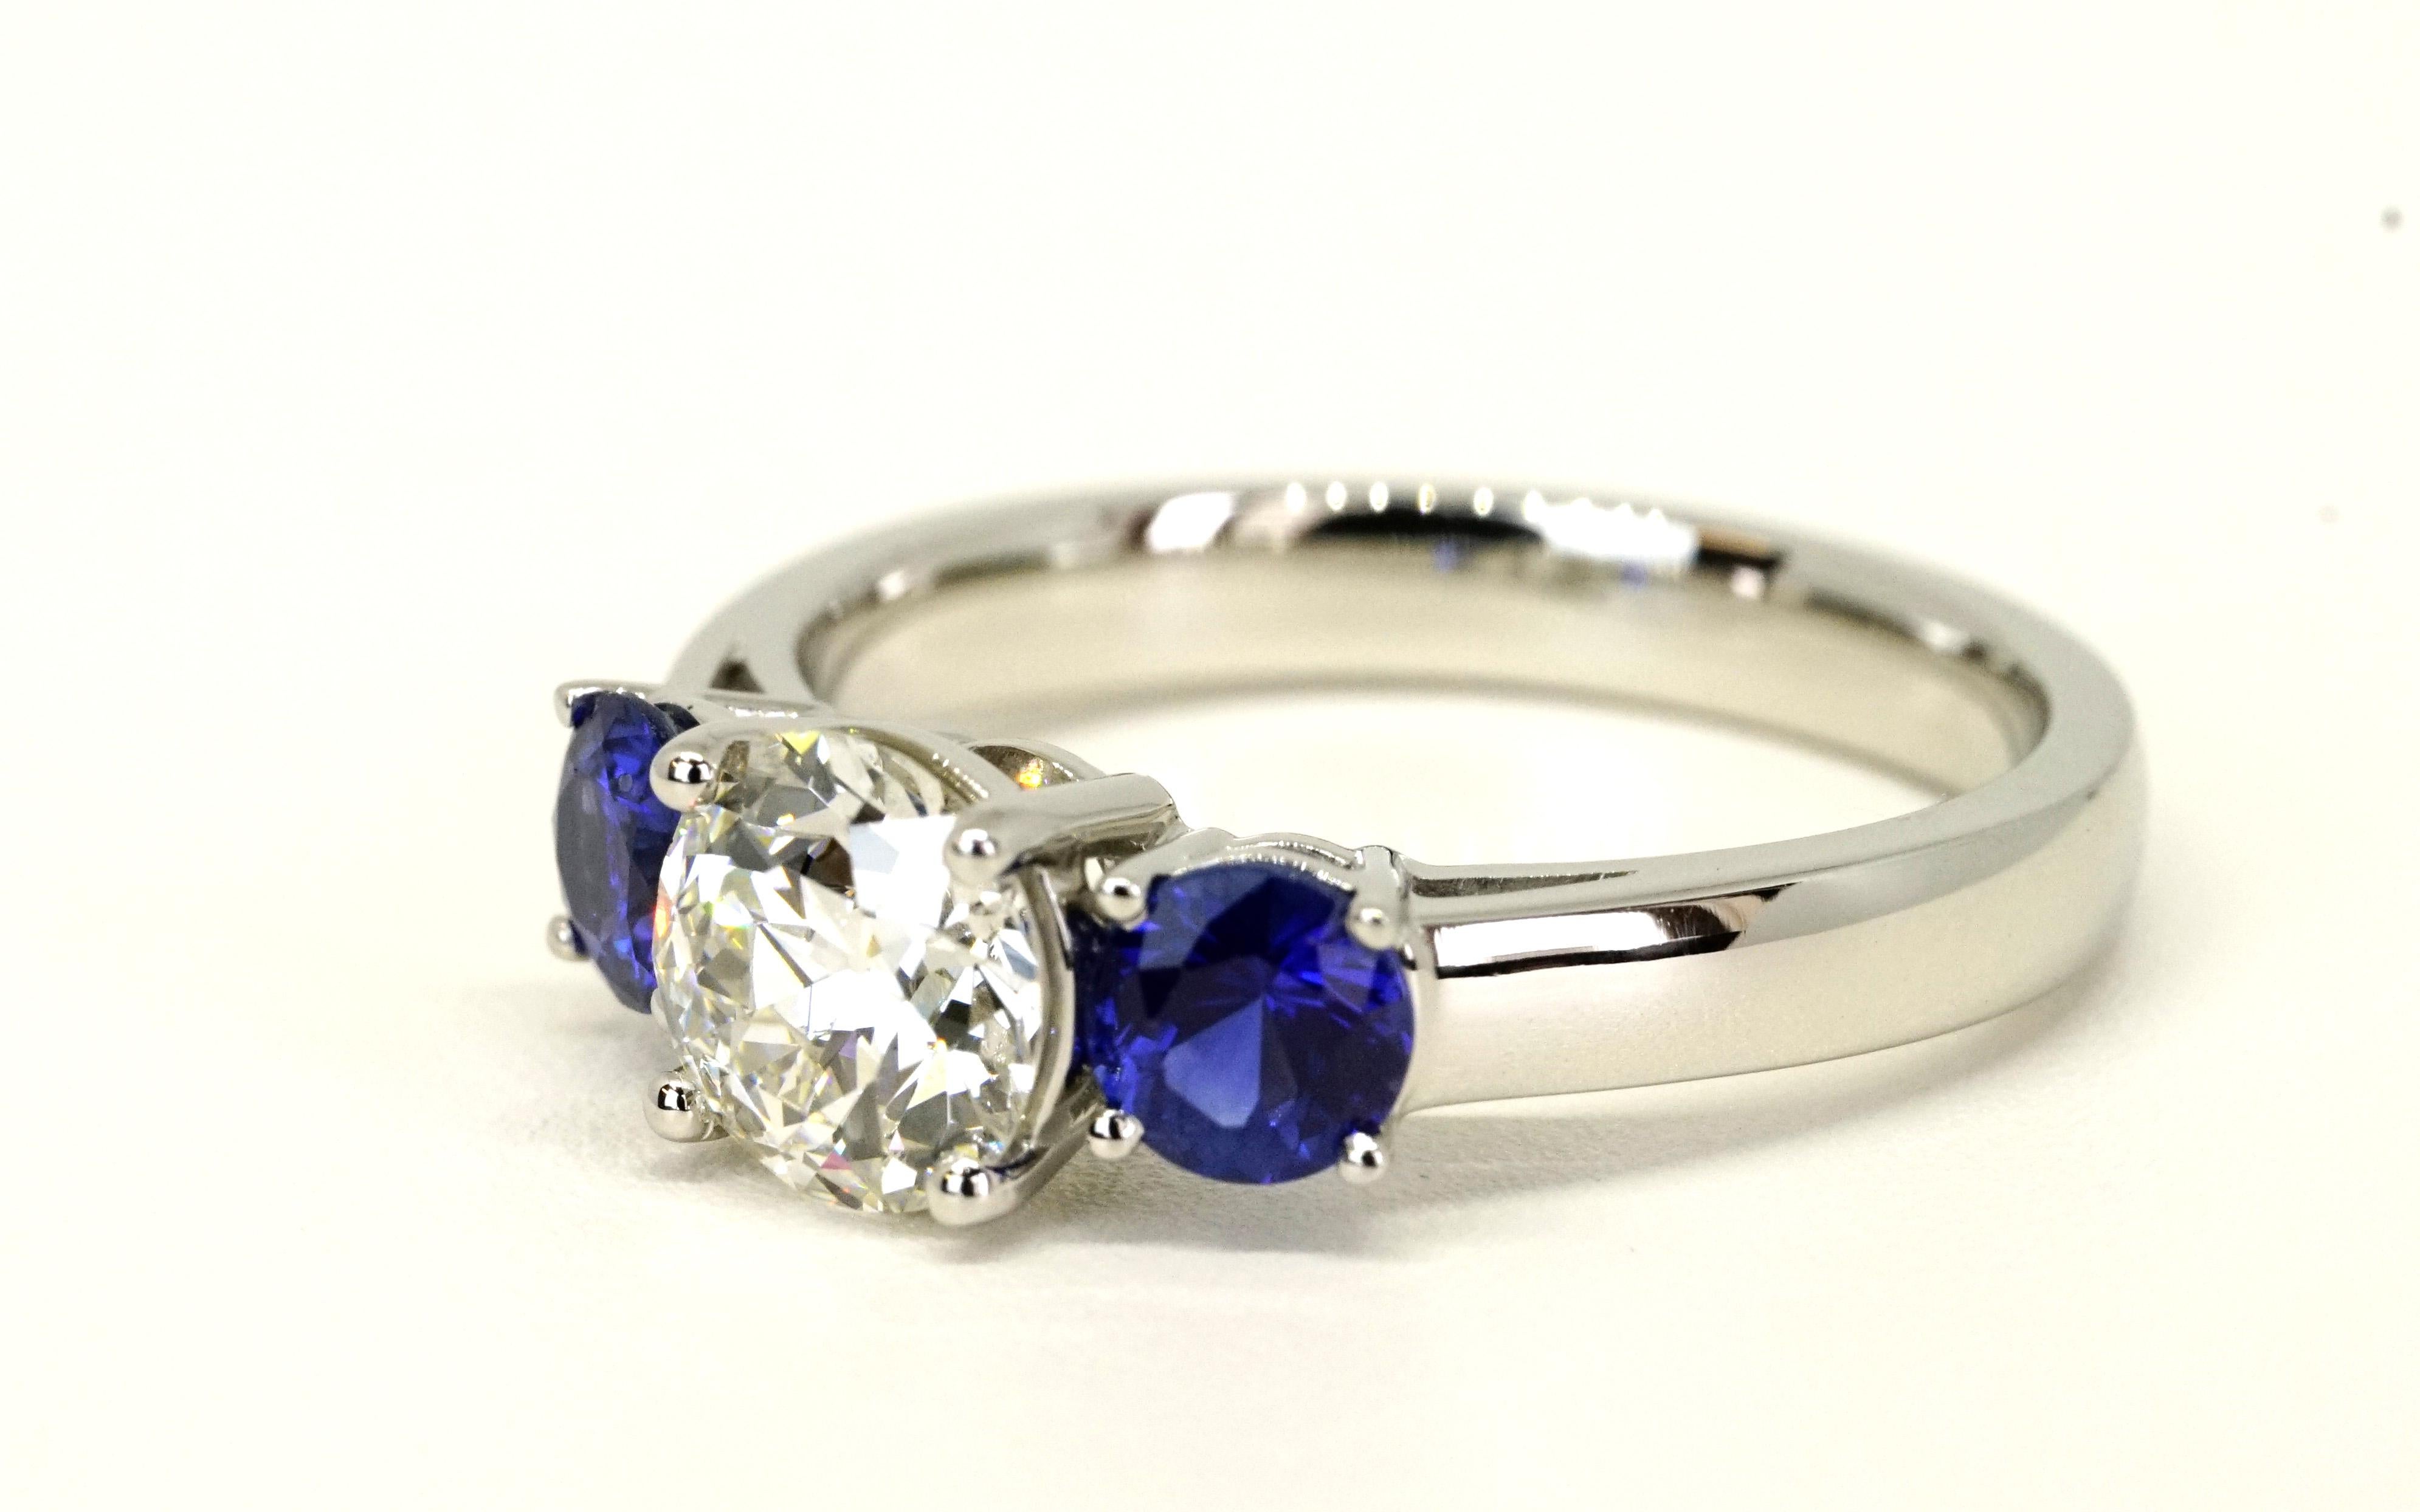 Old European Cut Diamond 1.05 Carat G SI1 GIA center set in a classic three stone Platinum ring with 0.60 carats total weight of natural deep blue sapphires. 
The Diamond is estimated to be cut in the early 1930's which gives this modern three stone